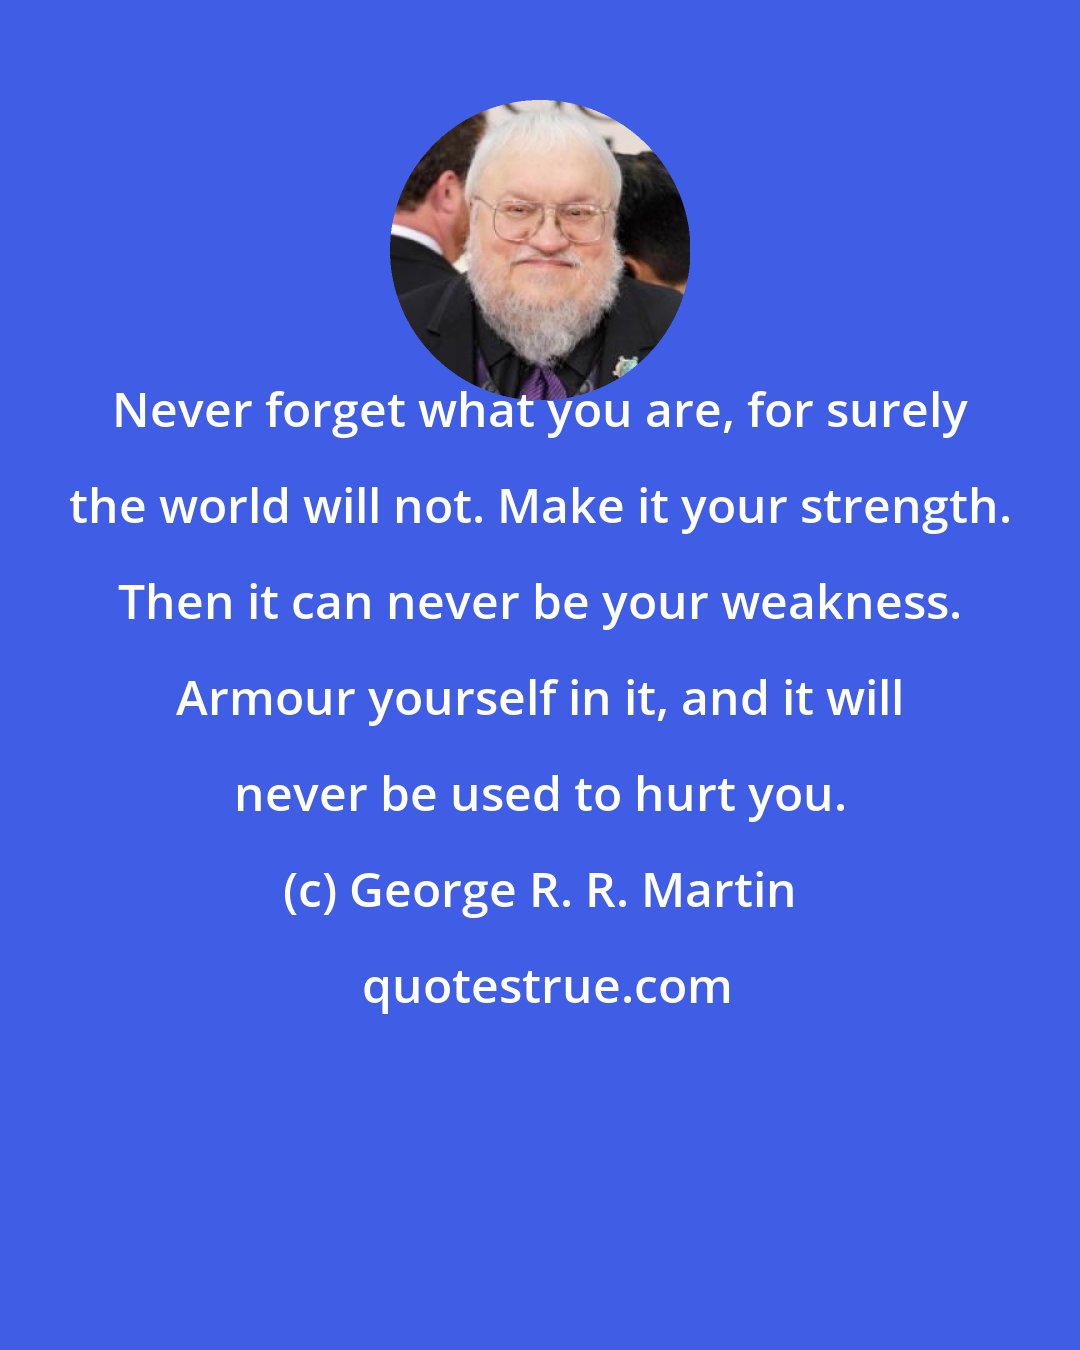 George R. R. Martin: Never forget what you are, for surely the world will not. Make it your strength. Then it can never be your weakness. Armour yourself in it, and it will never be used to hurt you.